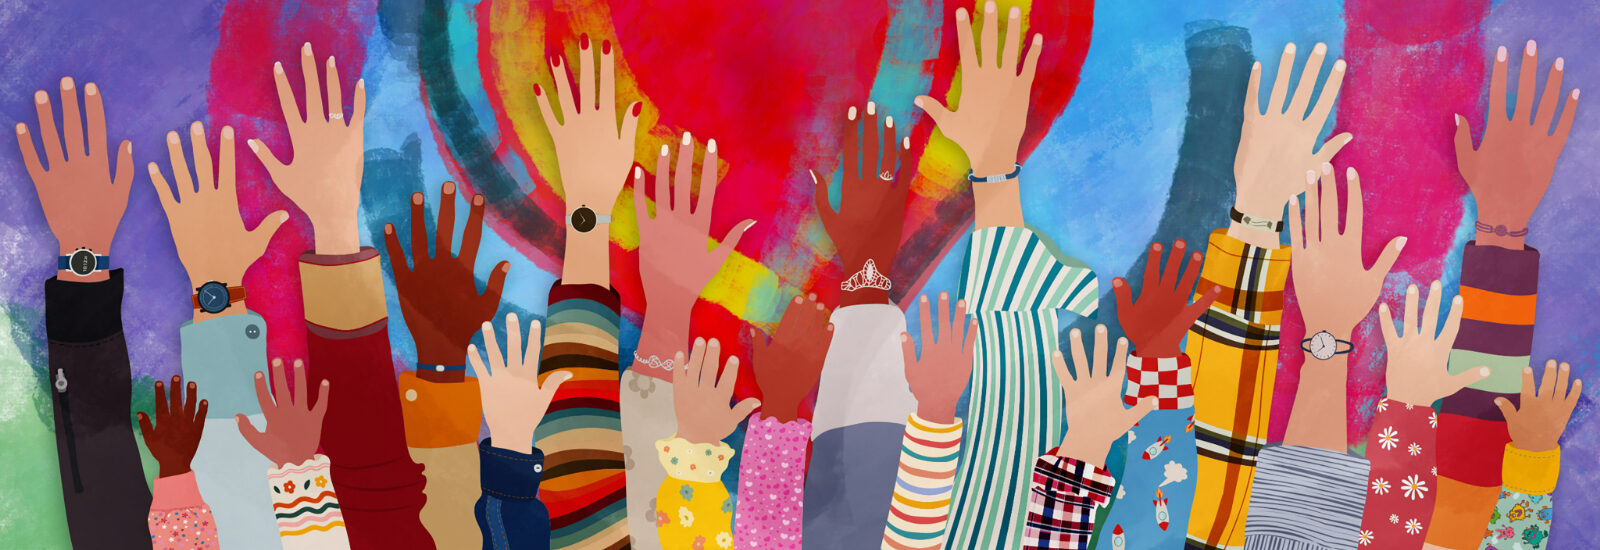 Group of diverse people with arms and hands raised towards a hand painted heart.